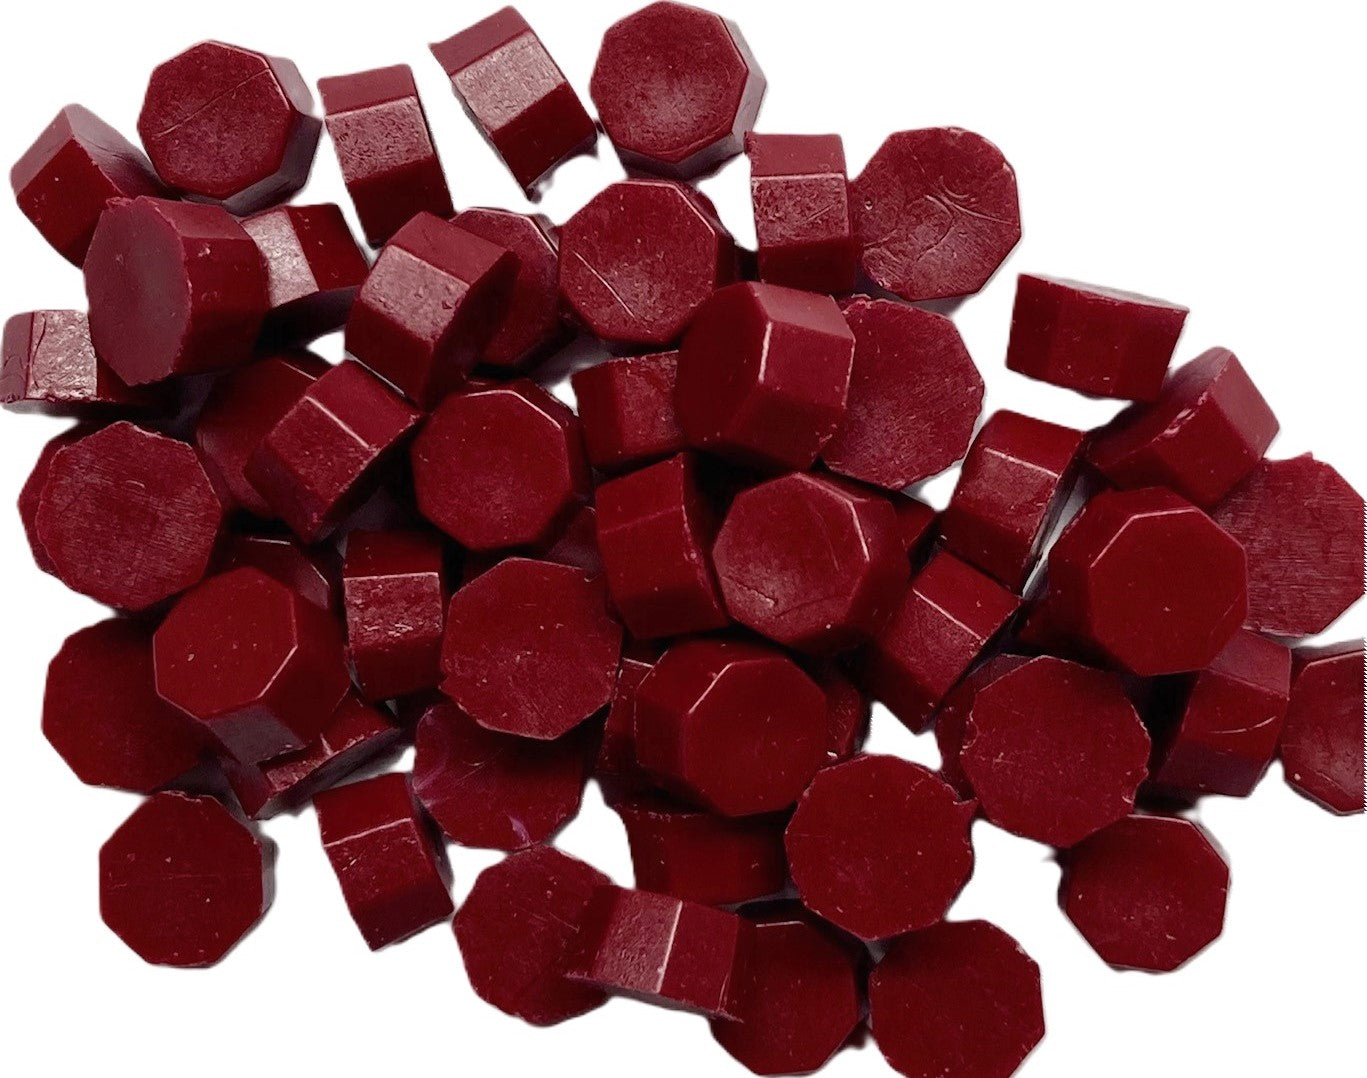 Cranberry (solid color) Sealing Wax Beads for Envelopes & Invitations, approx. 250 beads (3 oz)